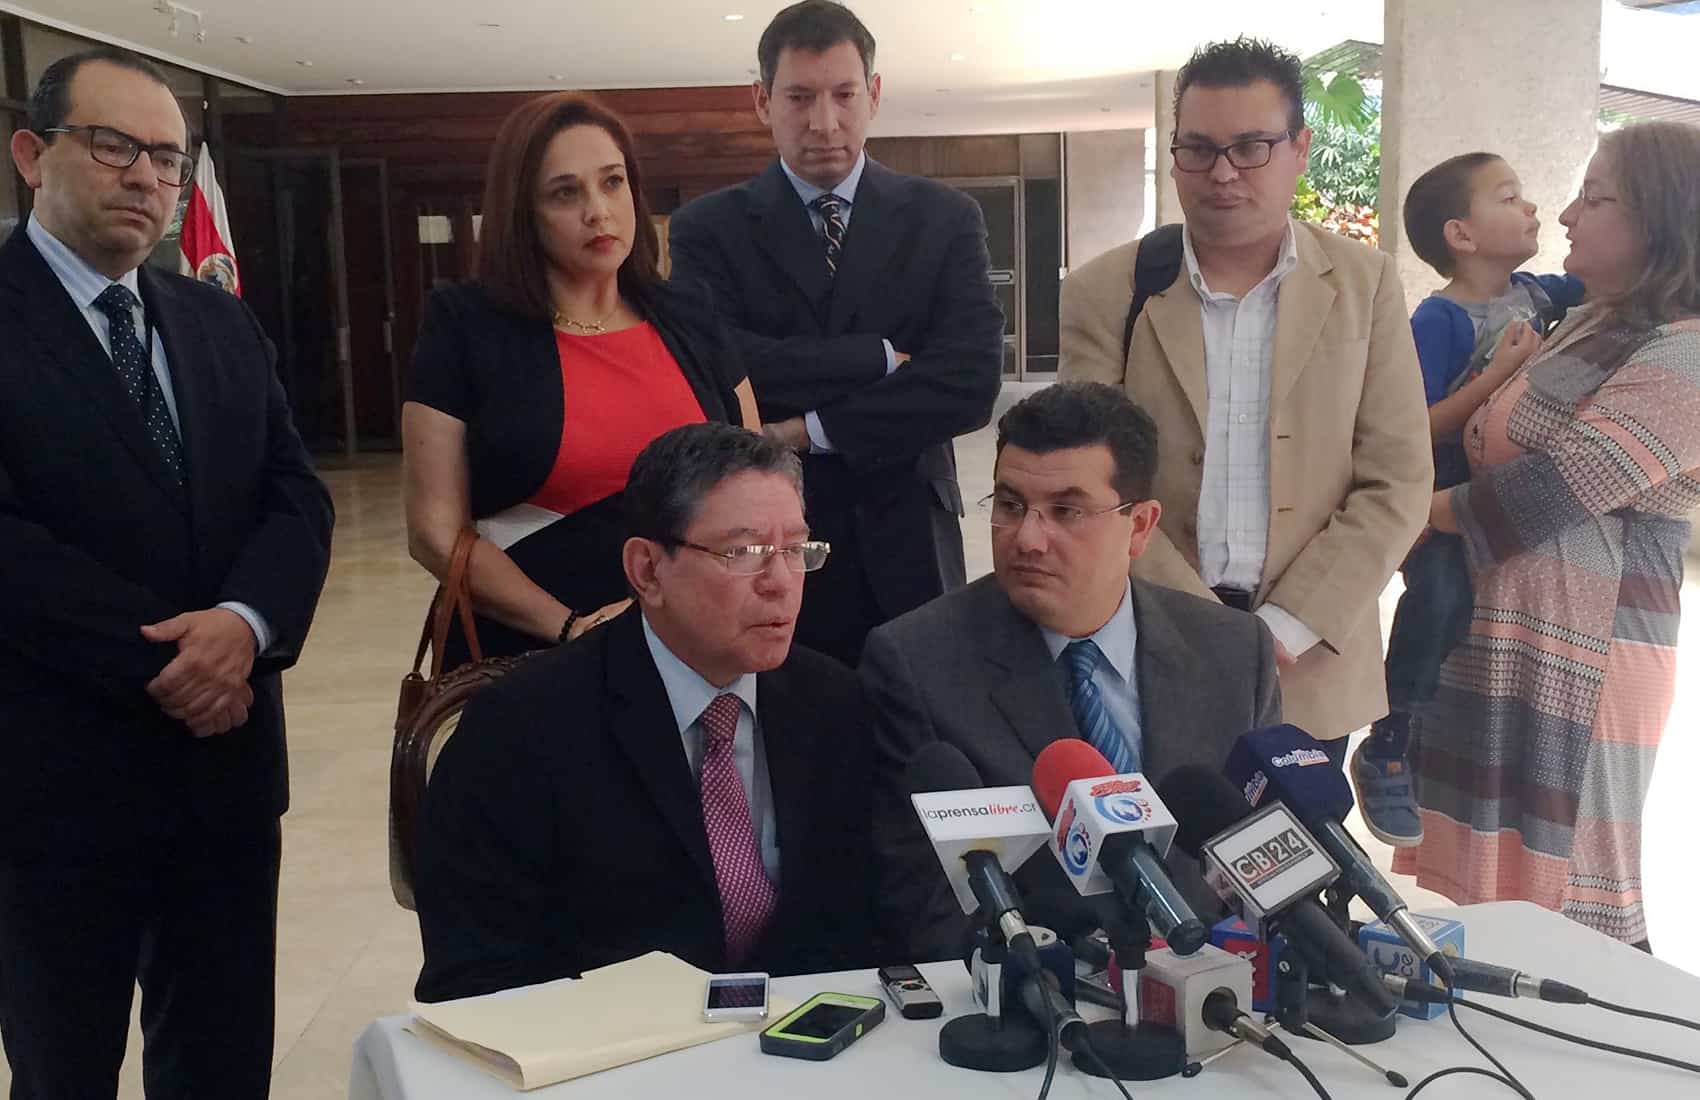 Attorney Huberth May Cantillano (bottom left) and Presidency Minister Sergio Alfaro Salas (bottom right) share results of a meeting between advocates of in vitro fertilization and President Luis Guillermo Solís, May 6, 2015.